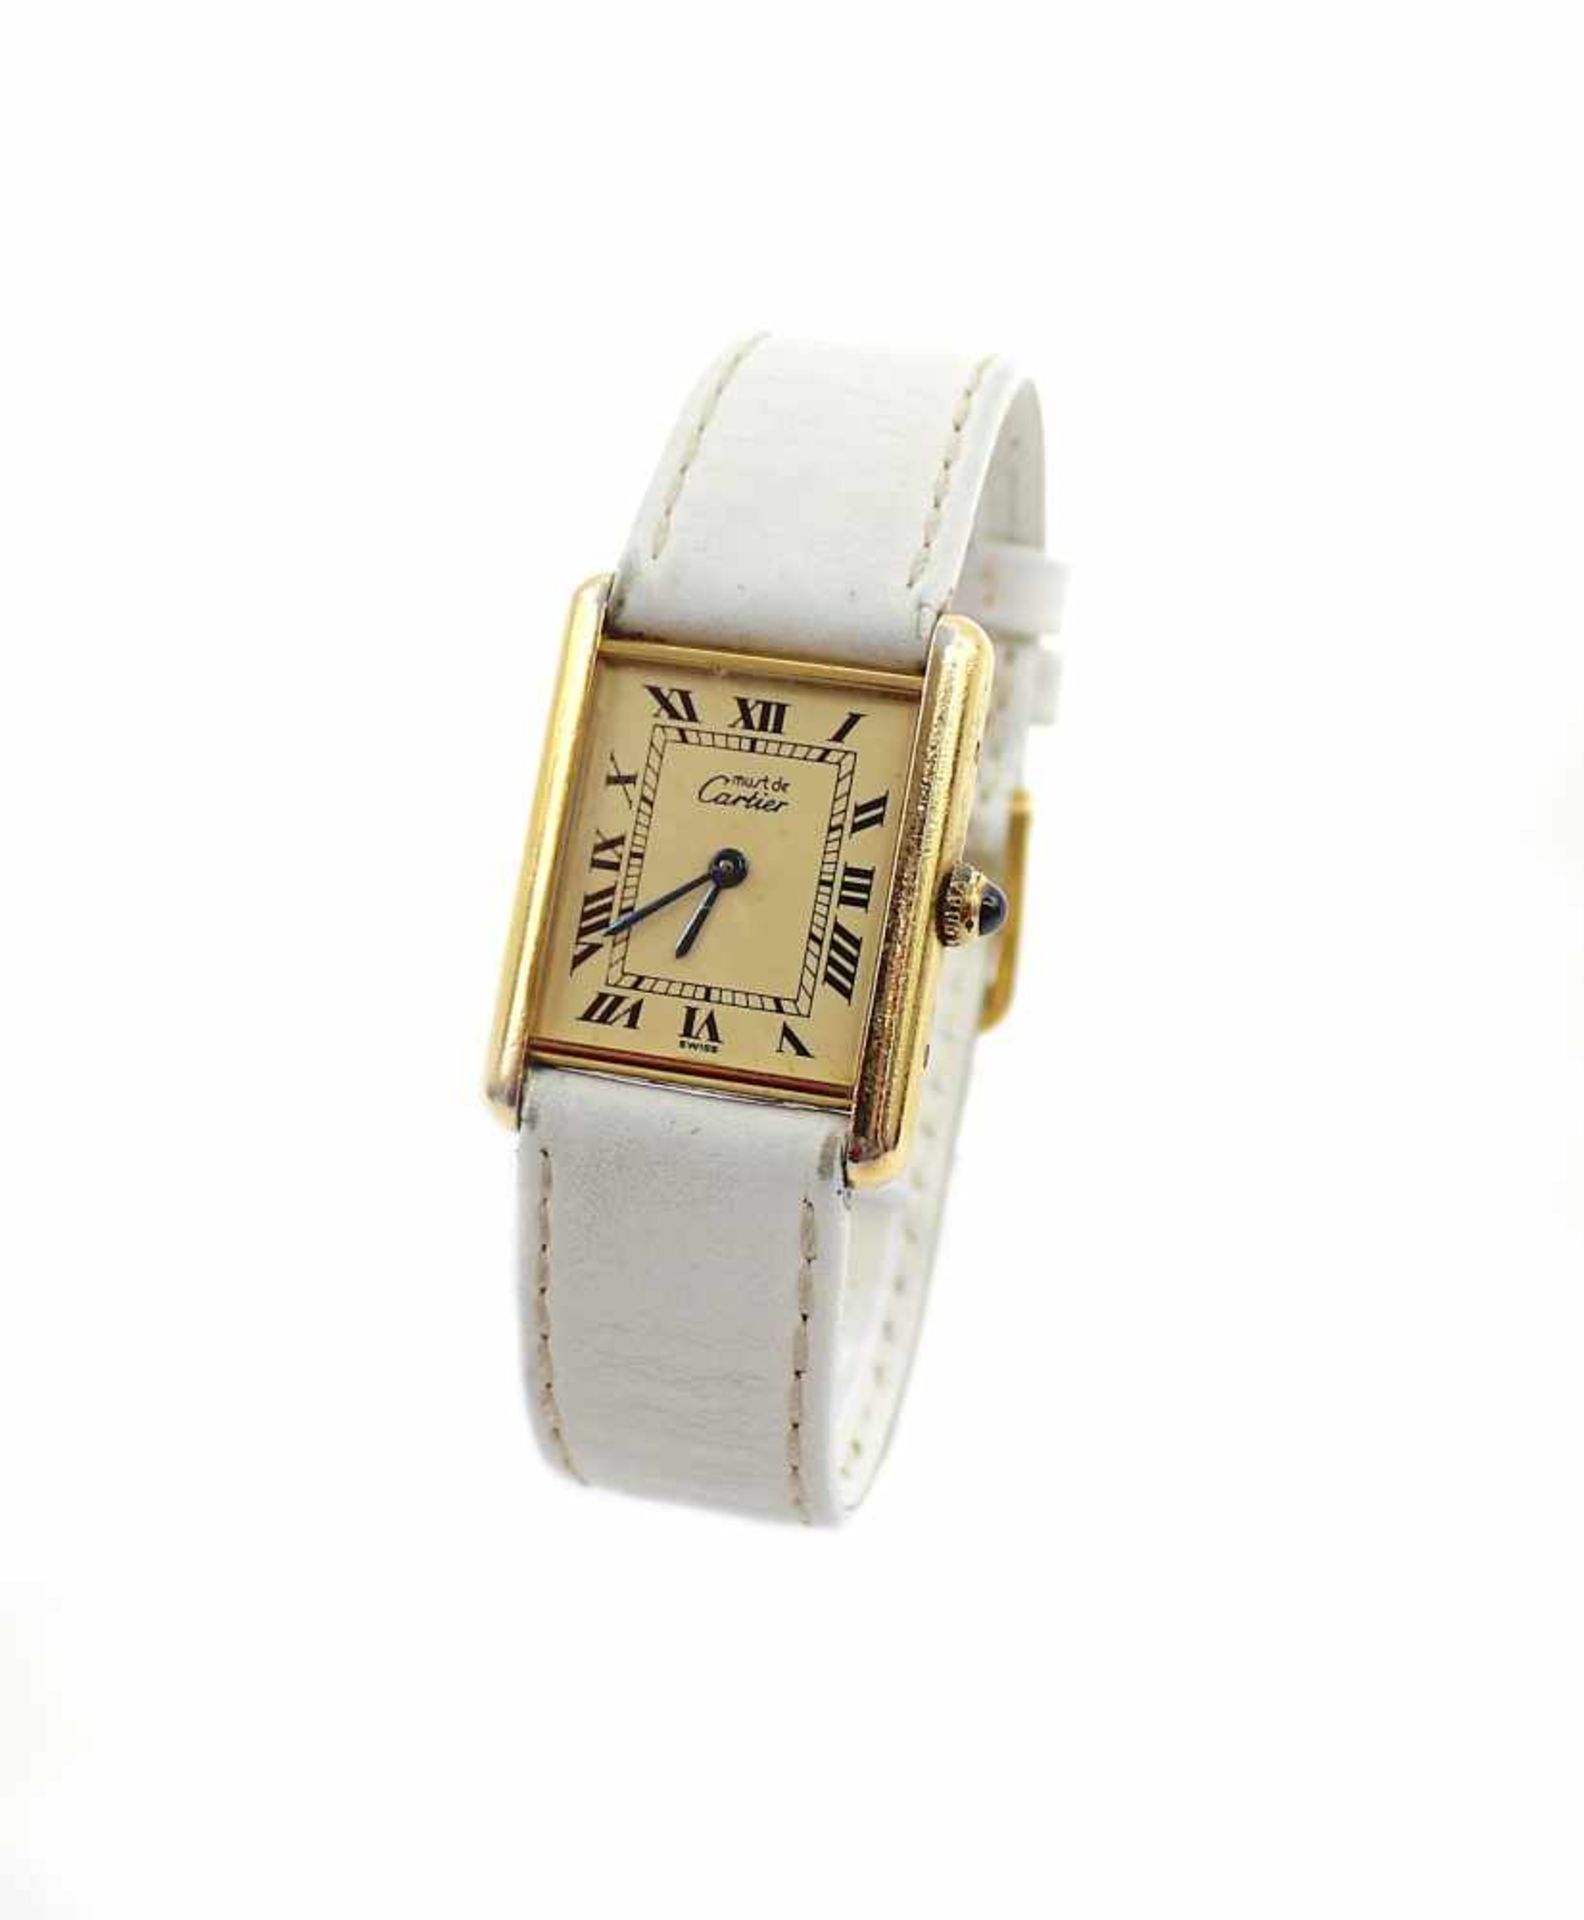 Wrist watch Cartier Tank 1615, Silver-gilt with sapphire cabochon, No. CC 121044 with a white